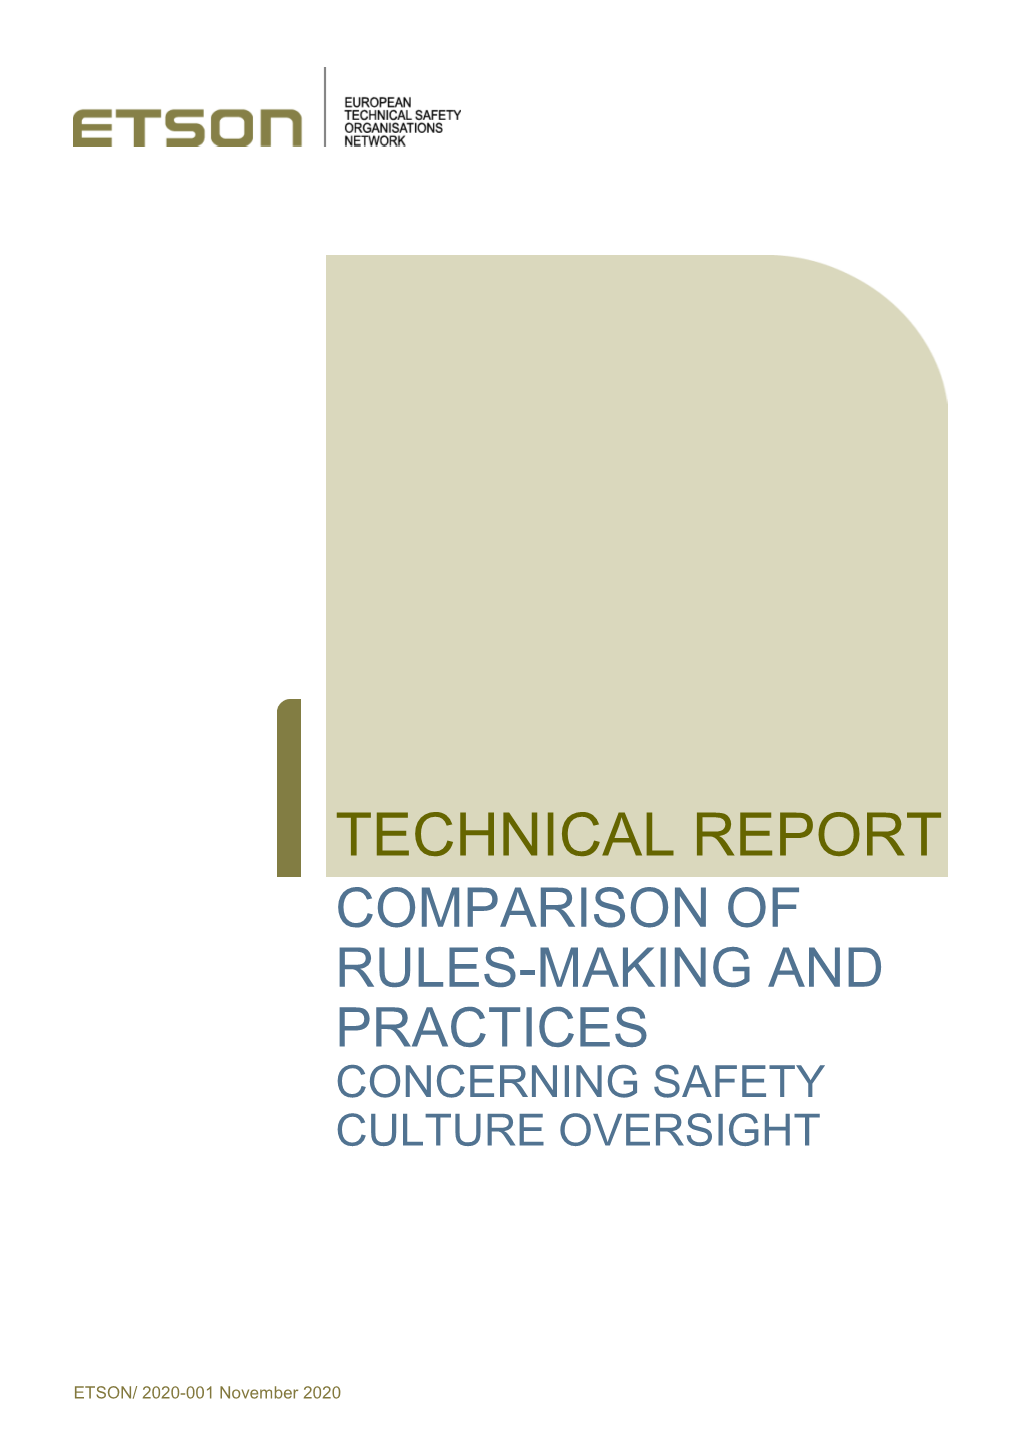 Technical Report Comparison of Rules-Making and Practices Concerning Safety Culture Oversight